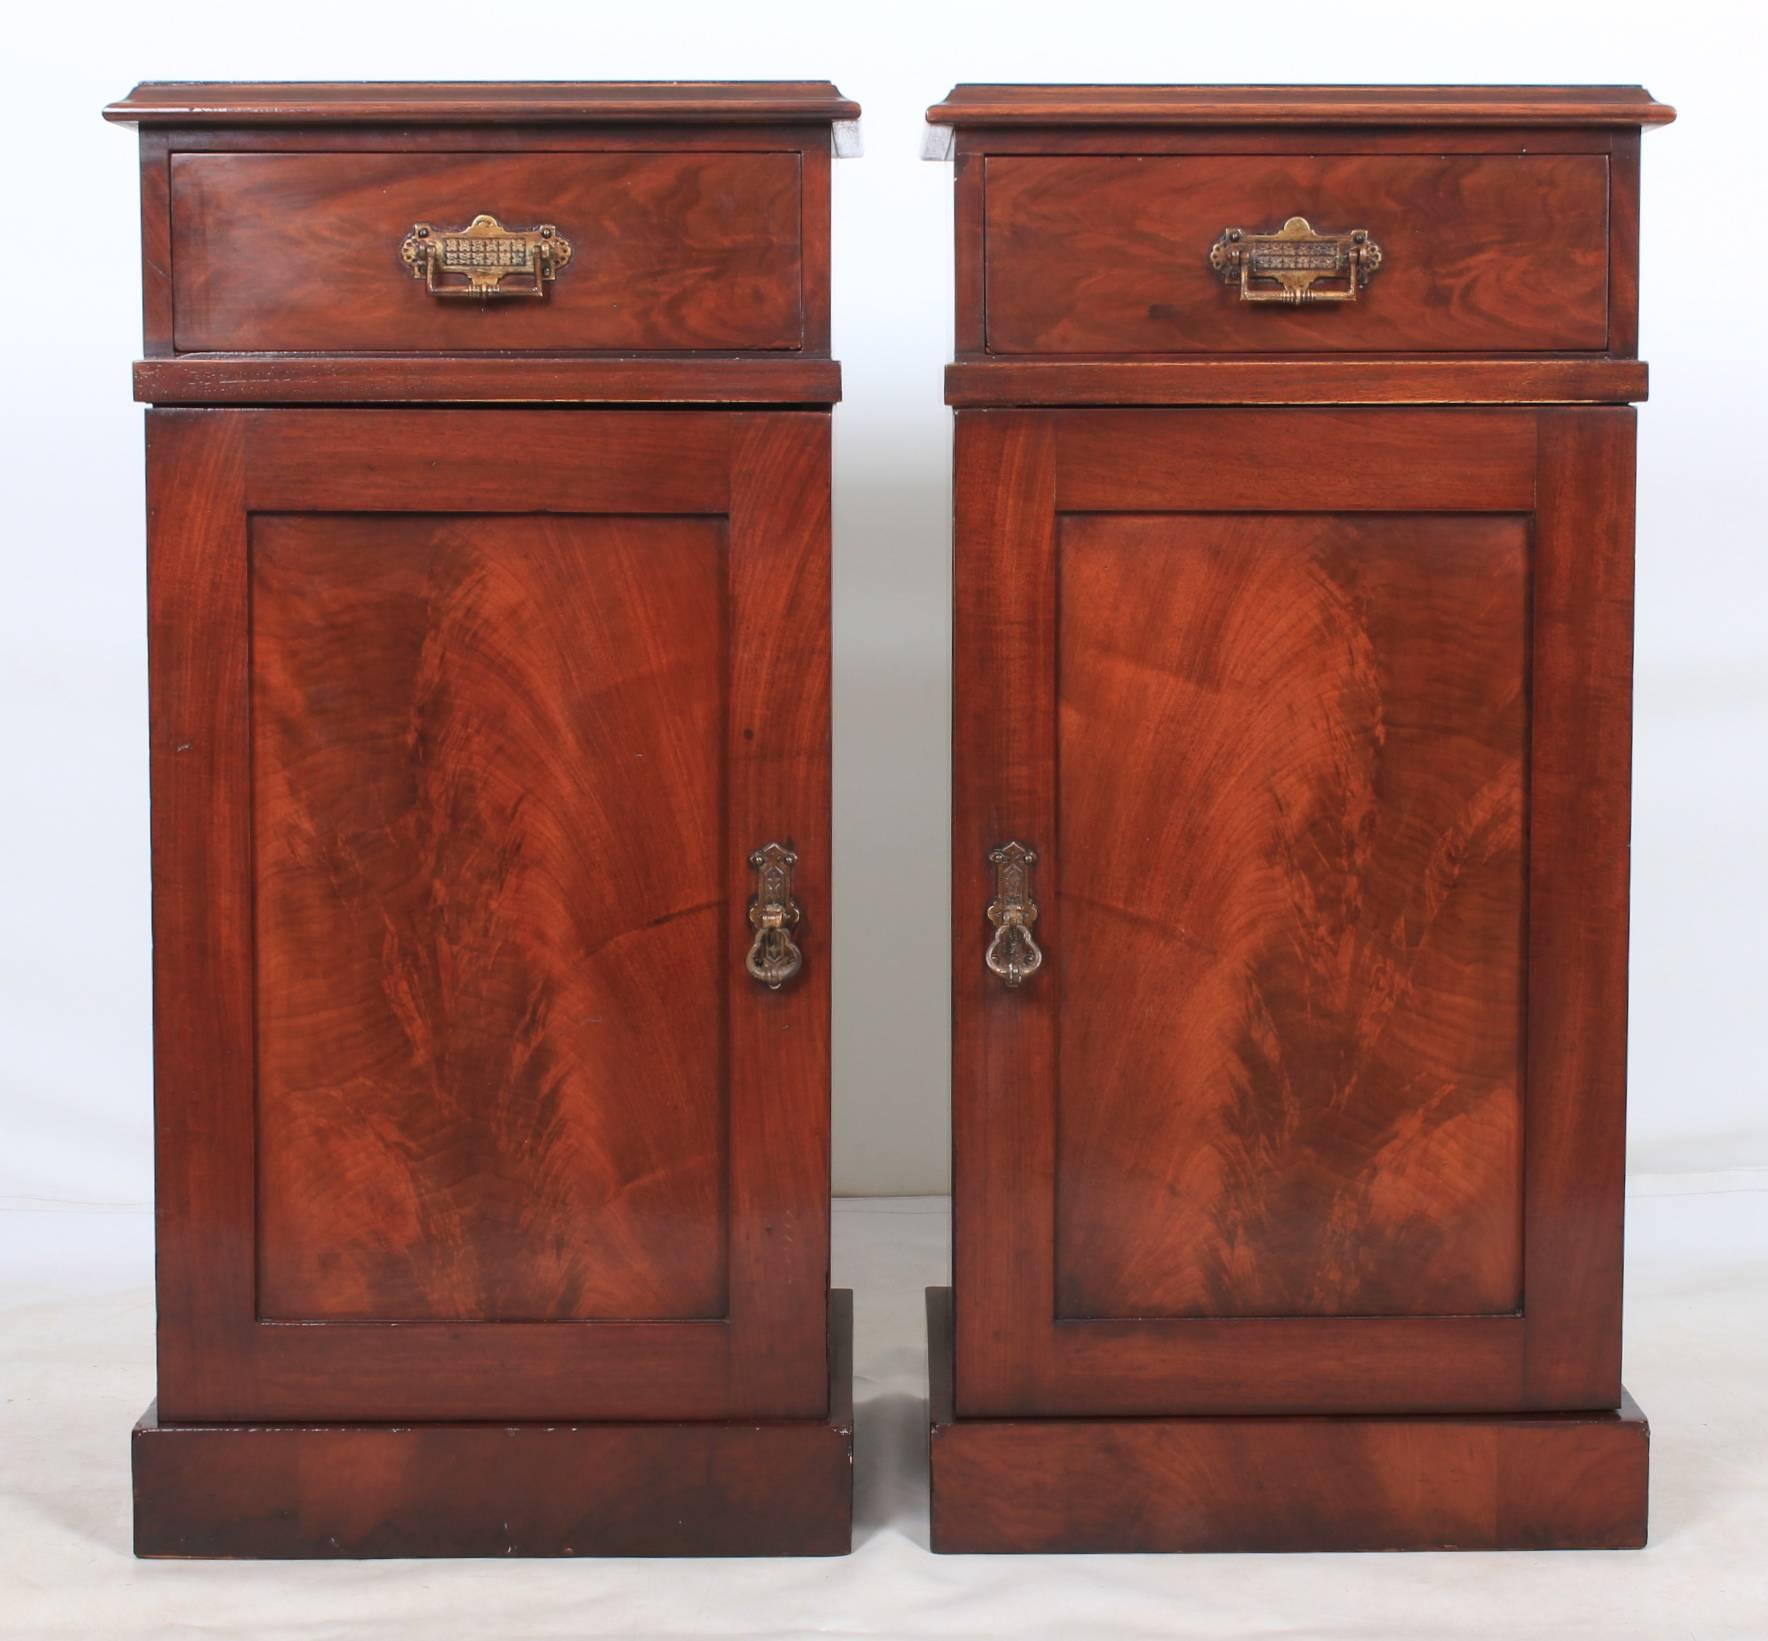 English, circa 1840.
This lovely pair of William IV bedside cabinets are in showroom condition.
Mahogany top over a single drawer of dovetailed construction, this is above a single cupboard door with a flame mahogany panel which opens to reveal a